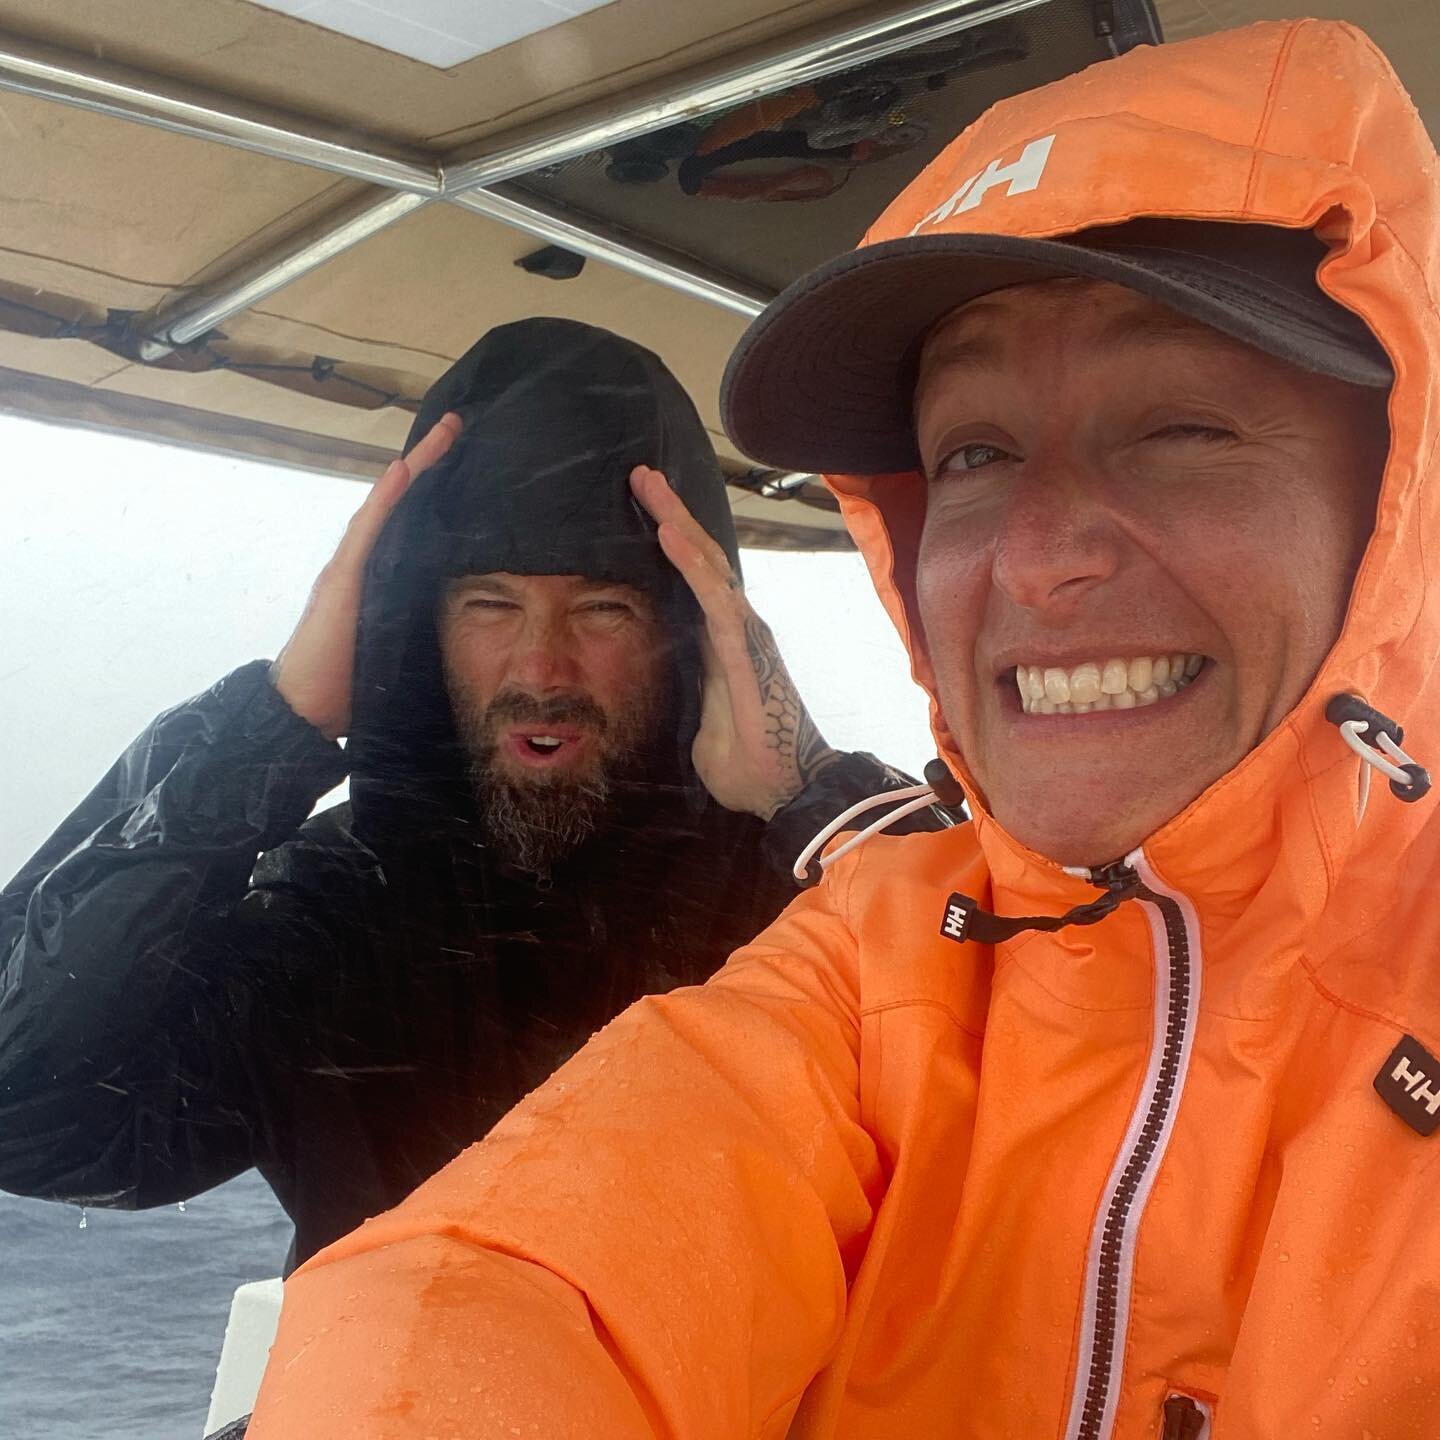 WE tend to show the glamours lifestyle of sailing, the magazine cover shots but here&rsquo;s the reality of it&hellip;

Things aren&rsquo;t always glamours, conditions get gnarly, we are at the mercy of the Mother Nature and we are reminded of her po